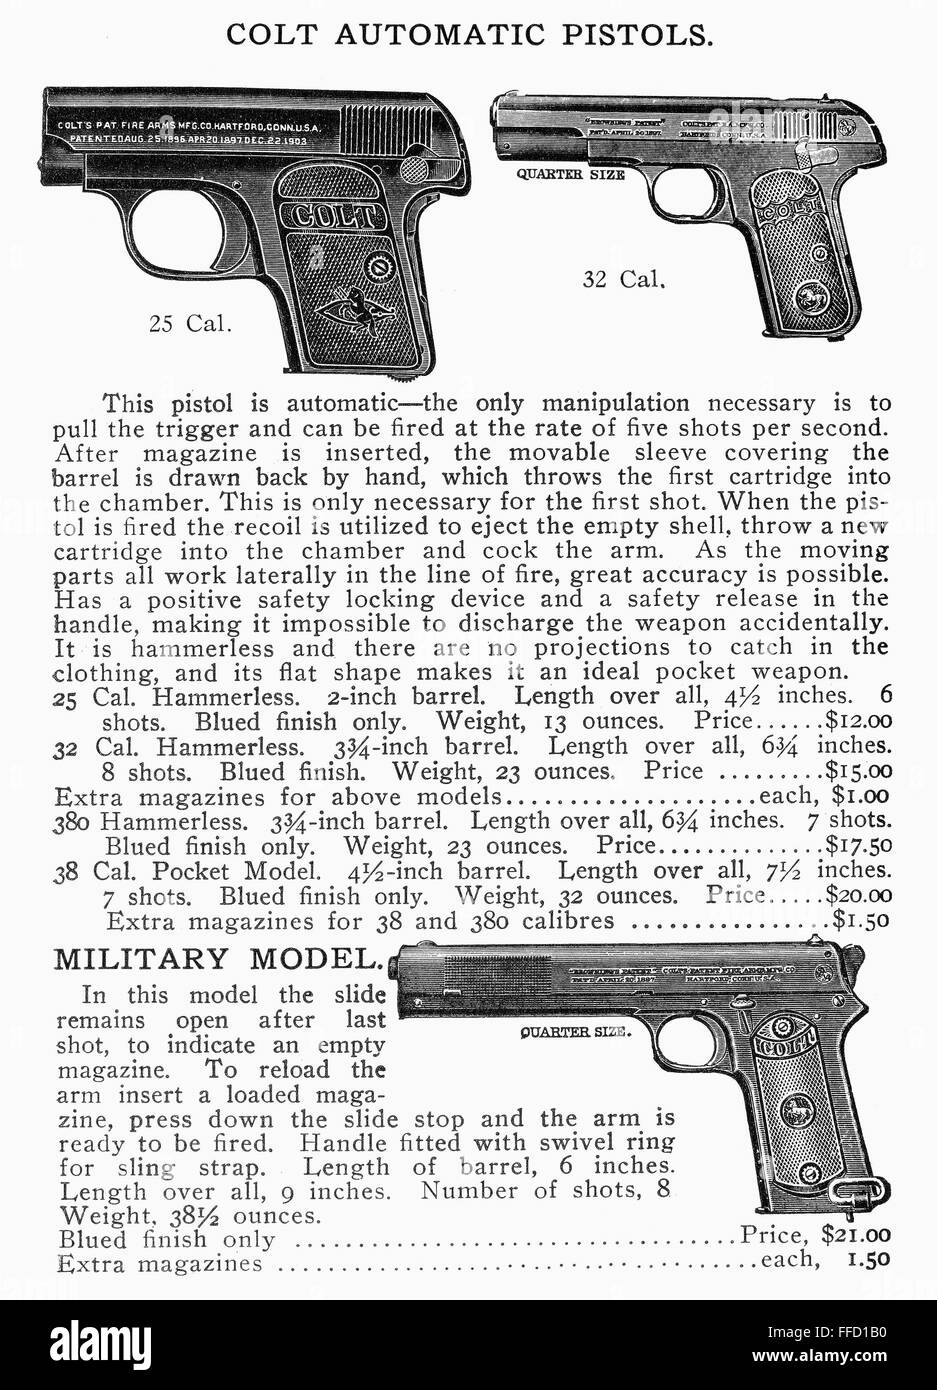 COLT AUTOMATIC PISTOLS. /nPage from an Abercrombie and Fitch catalog advertising Colt automatic pistols, early 20th century. Stock Photo